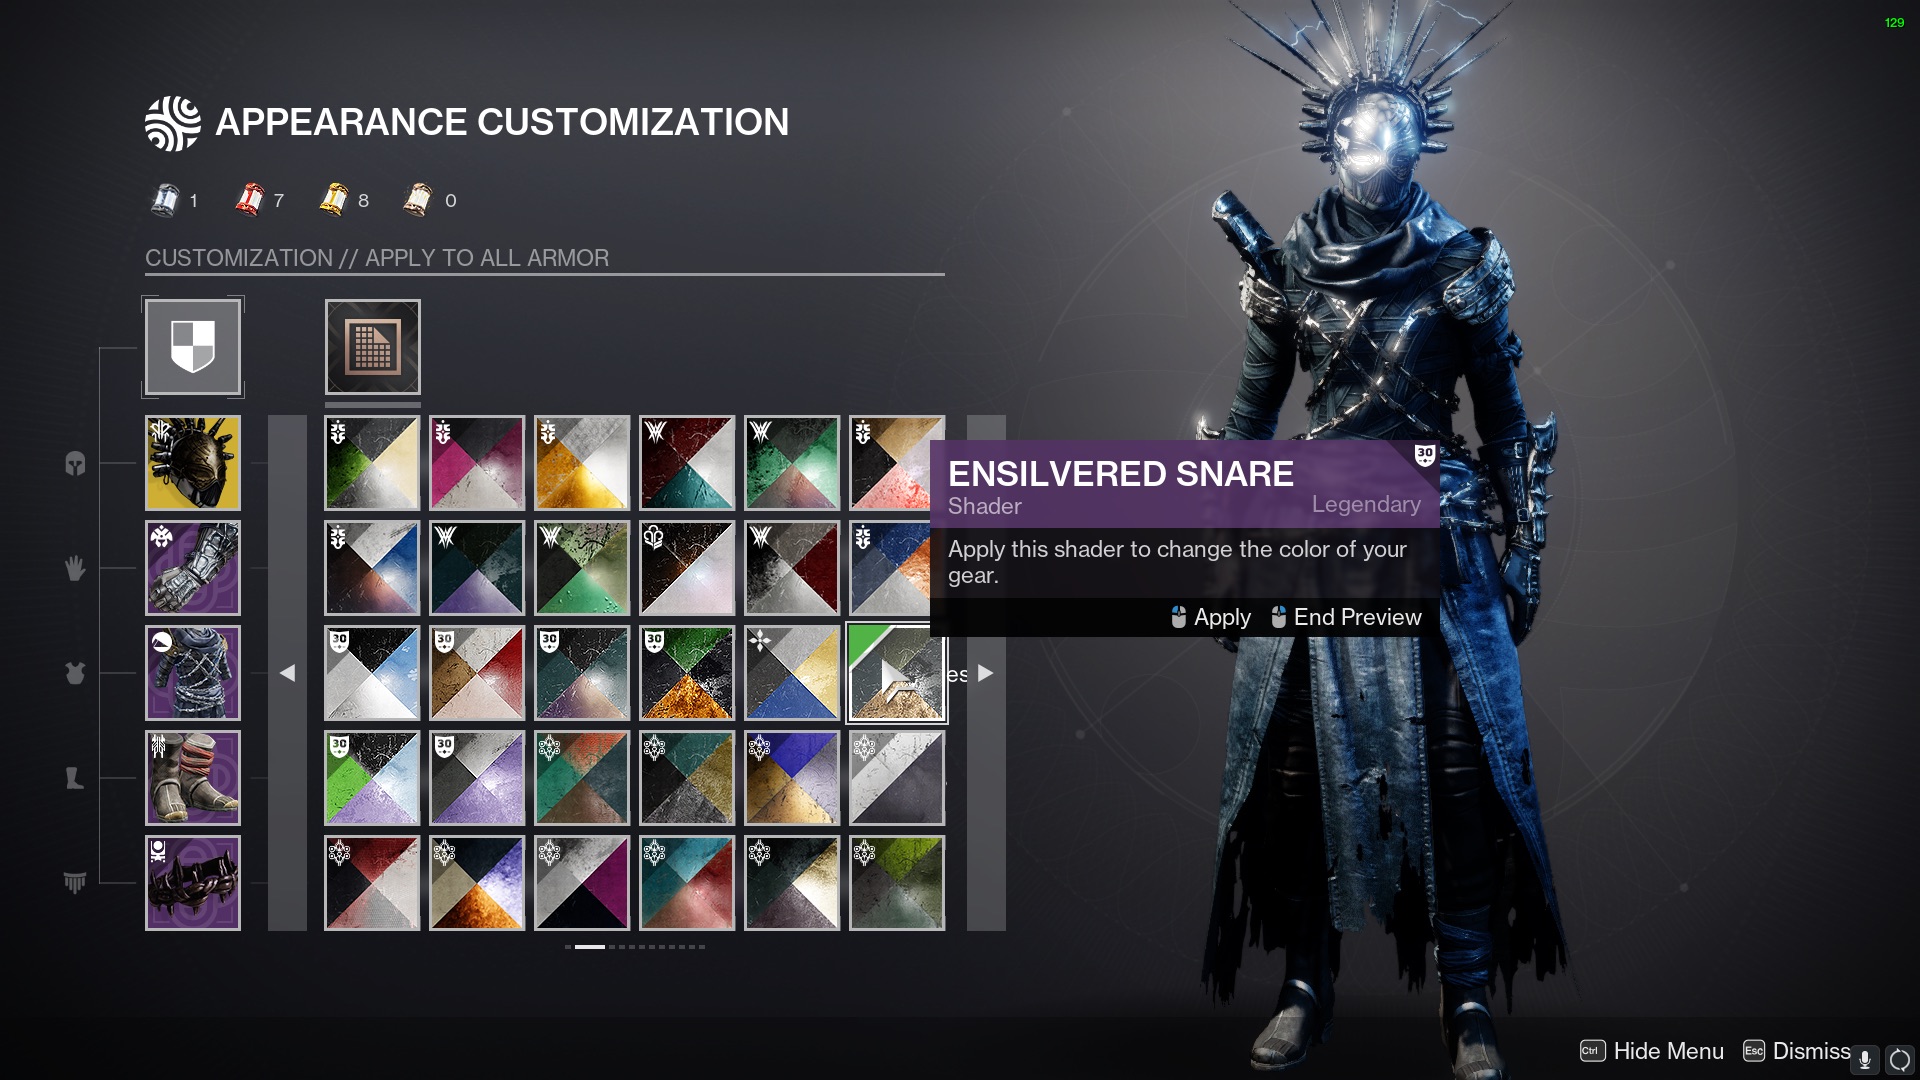 Shaders Ensilvered Snare featured